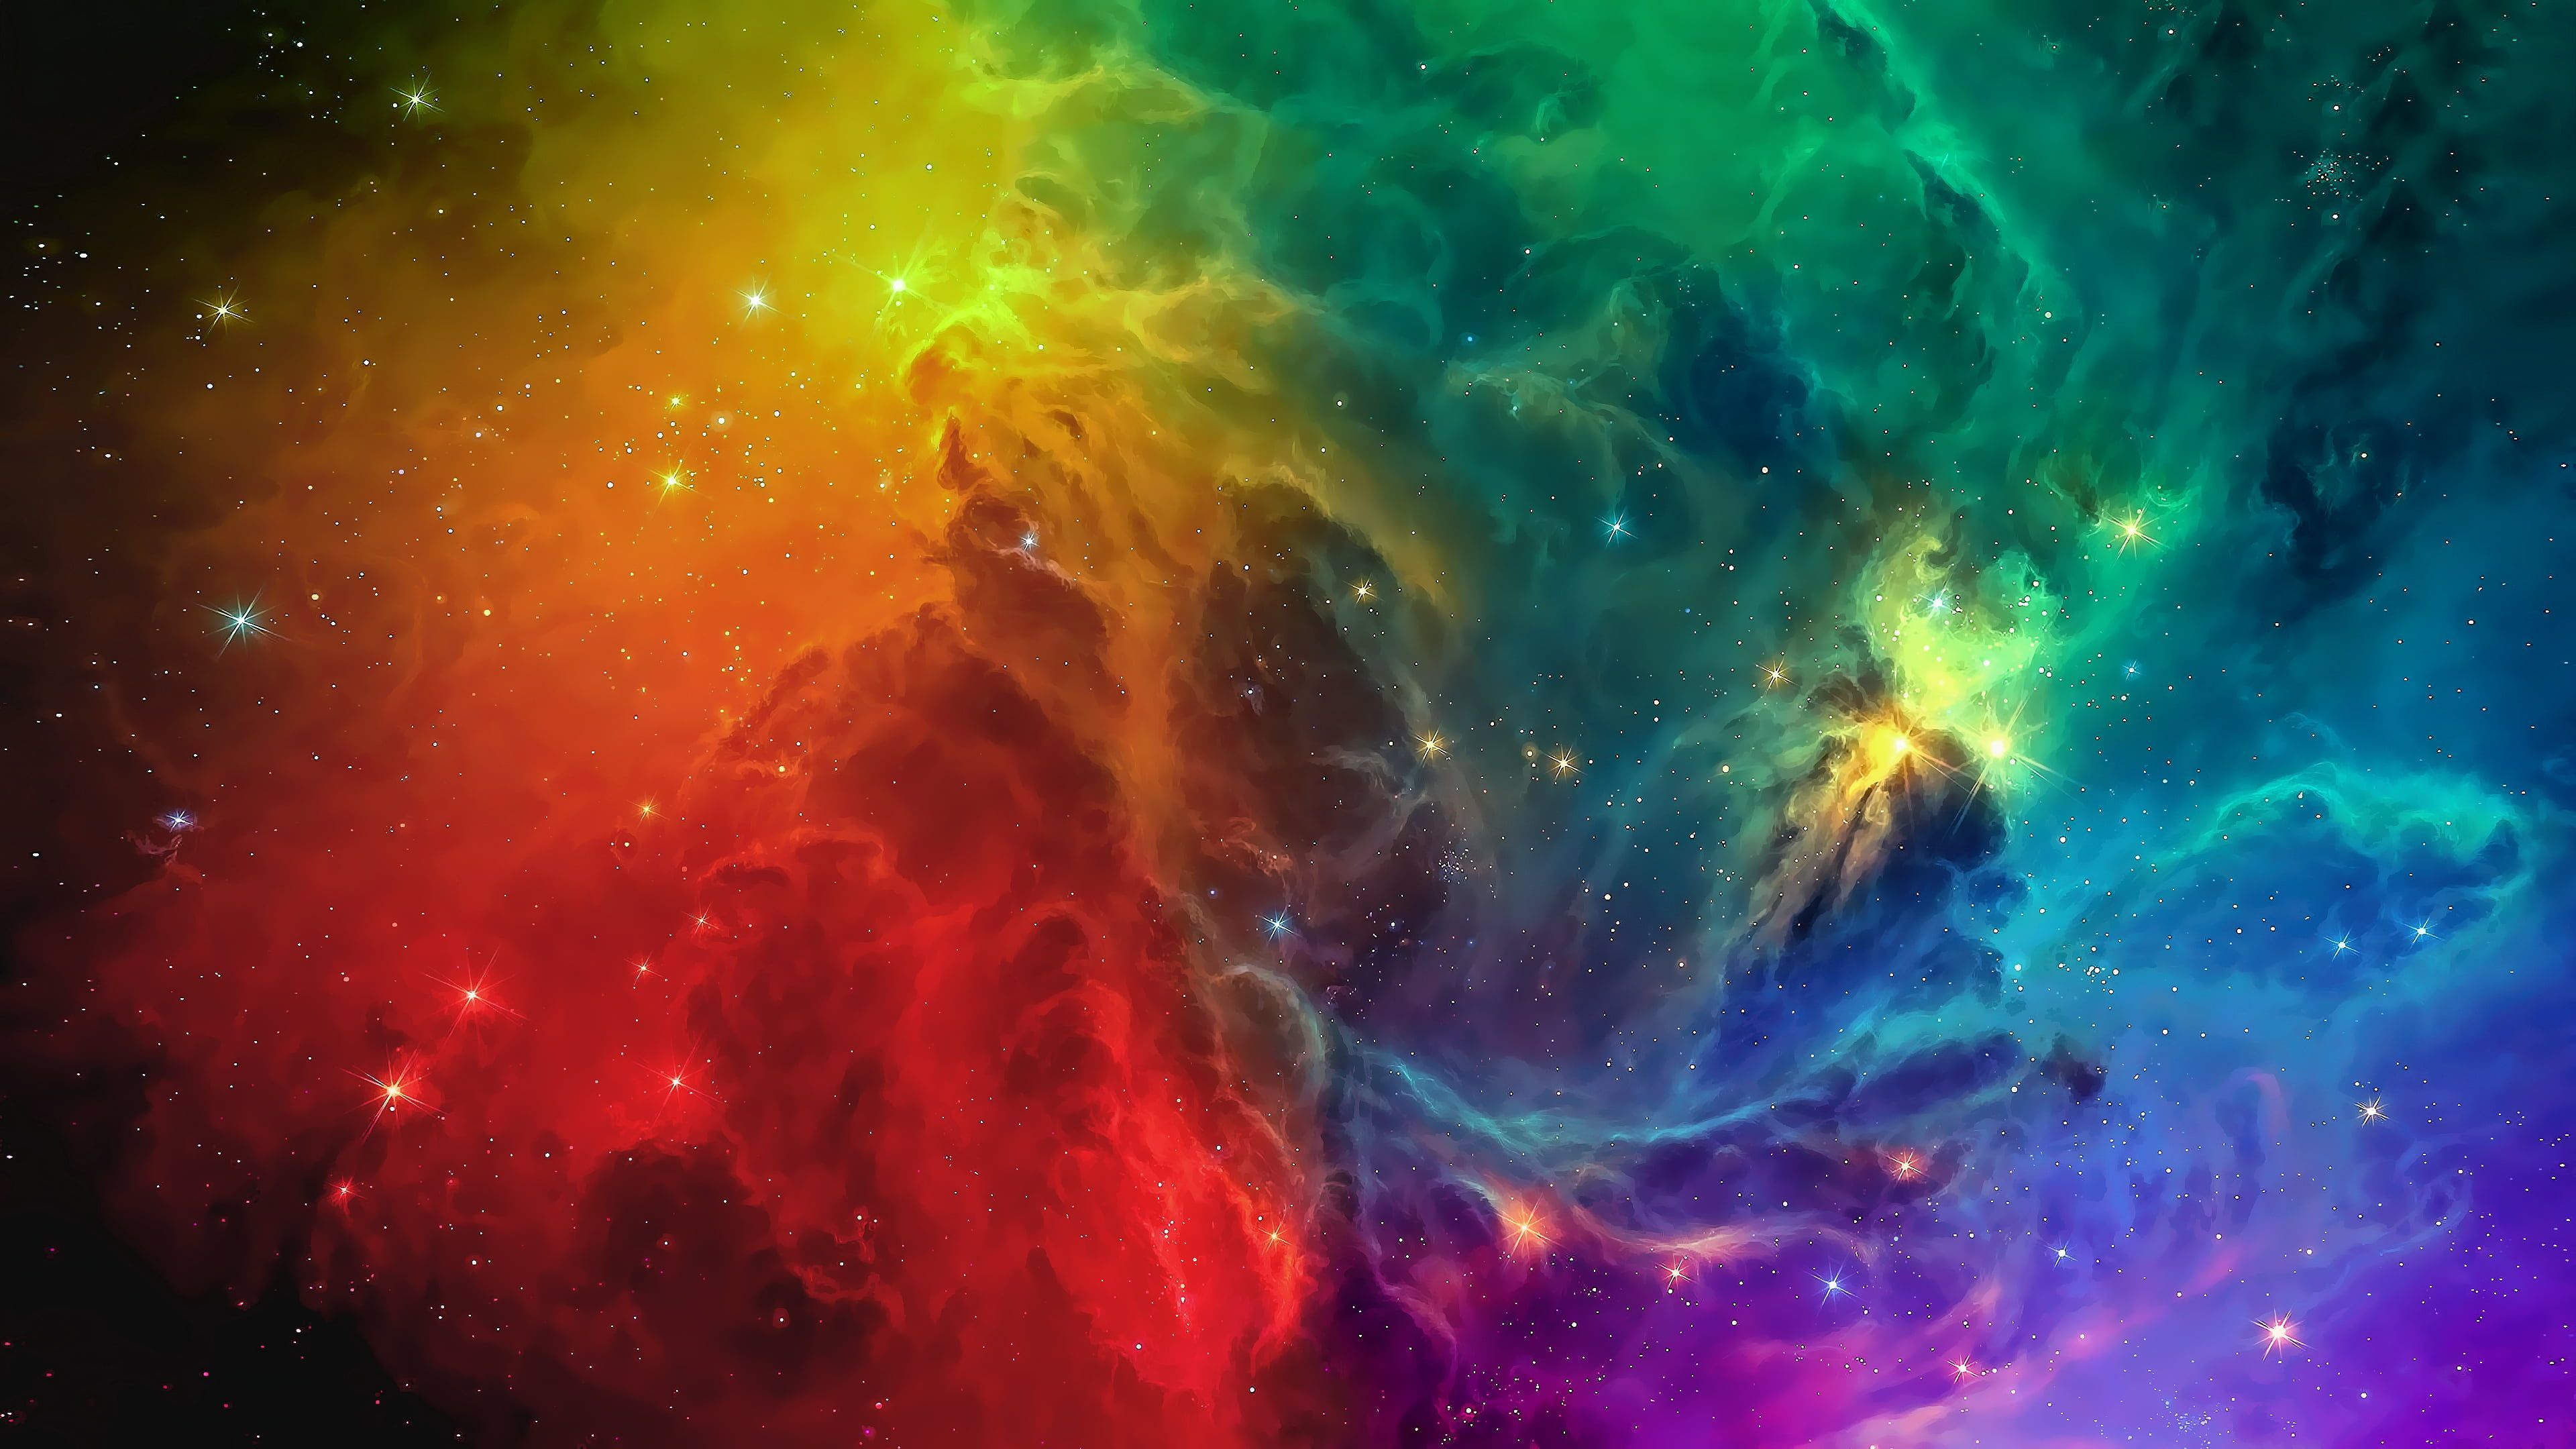 multicolored galaxy illustration #galaxy #space #stars #universe #spacescapes #nebula #red #yellow #green #cyan #blue #violet #pink #orange # 4K #wallpaper #hdwa